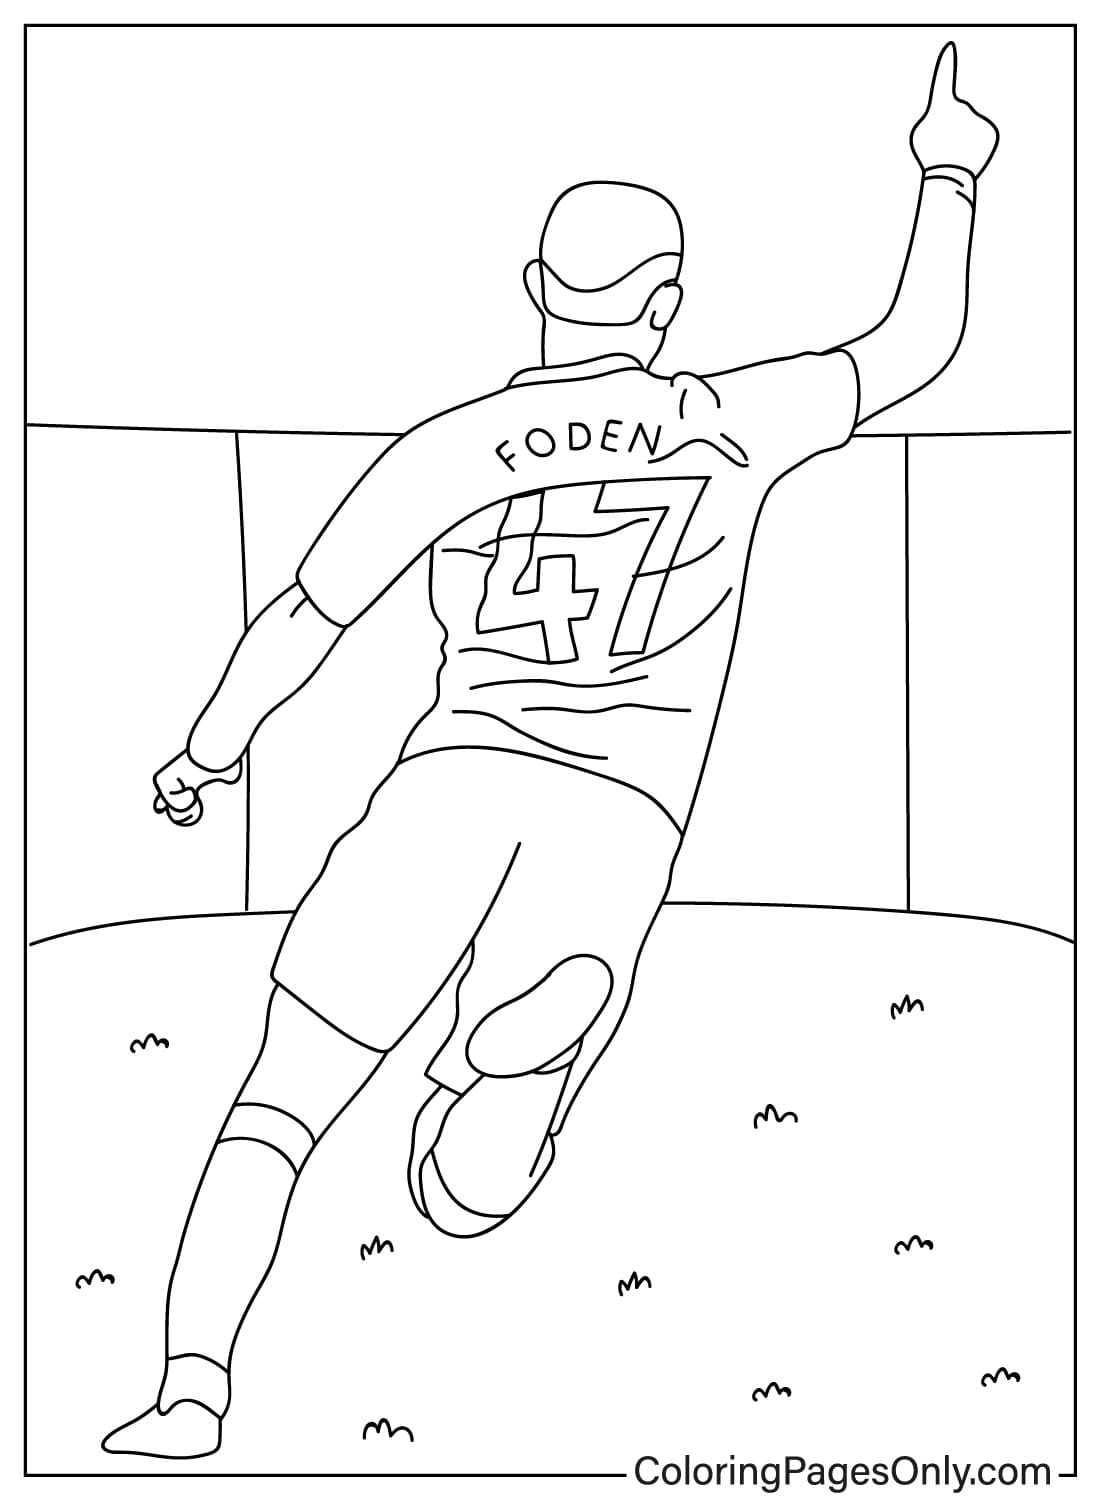 Phil Foden Goal Celebration Coloring Page from Phil Foden